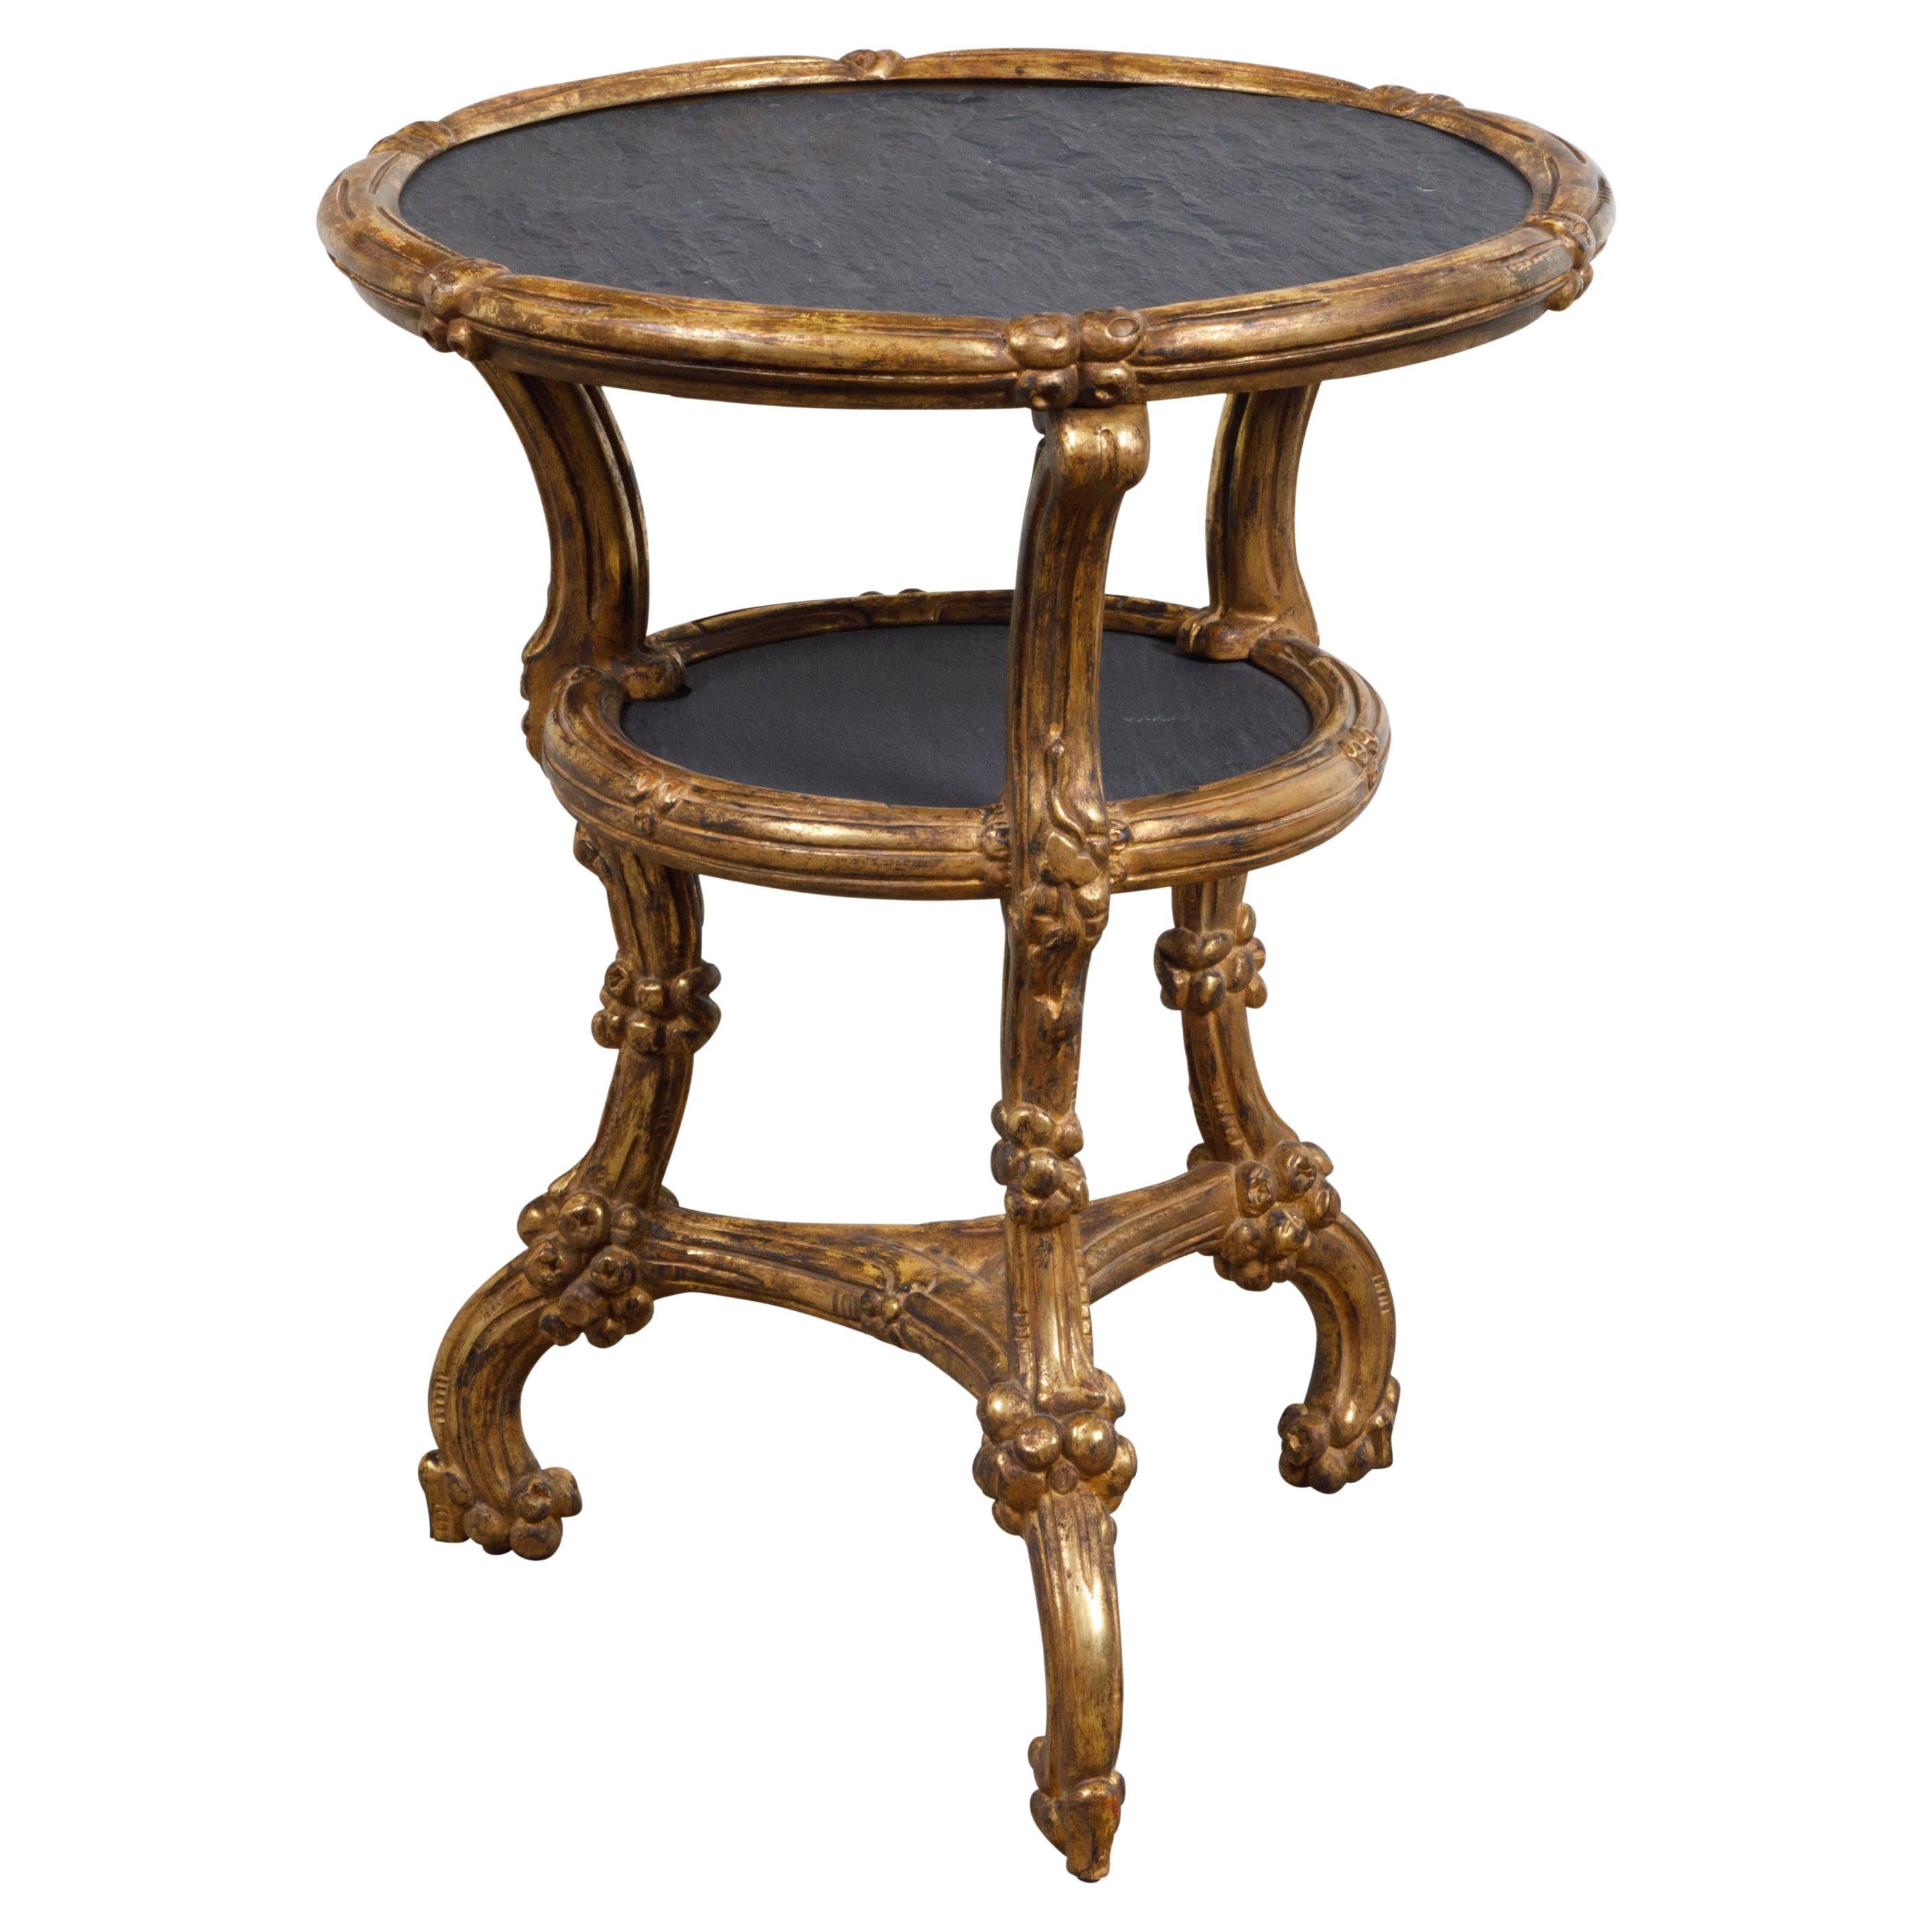 Italian Carved Giltwood Side Table with Slate Top, Shelf and Floral Motifs